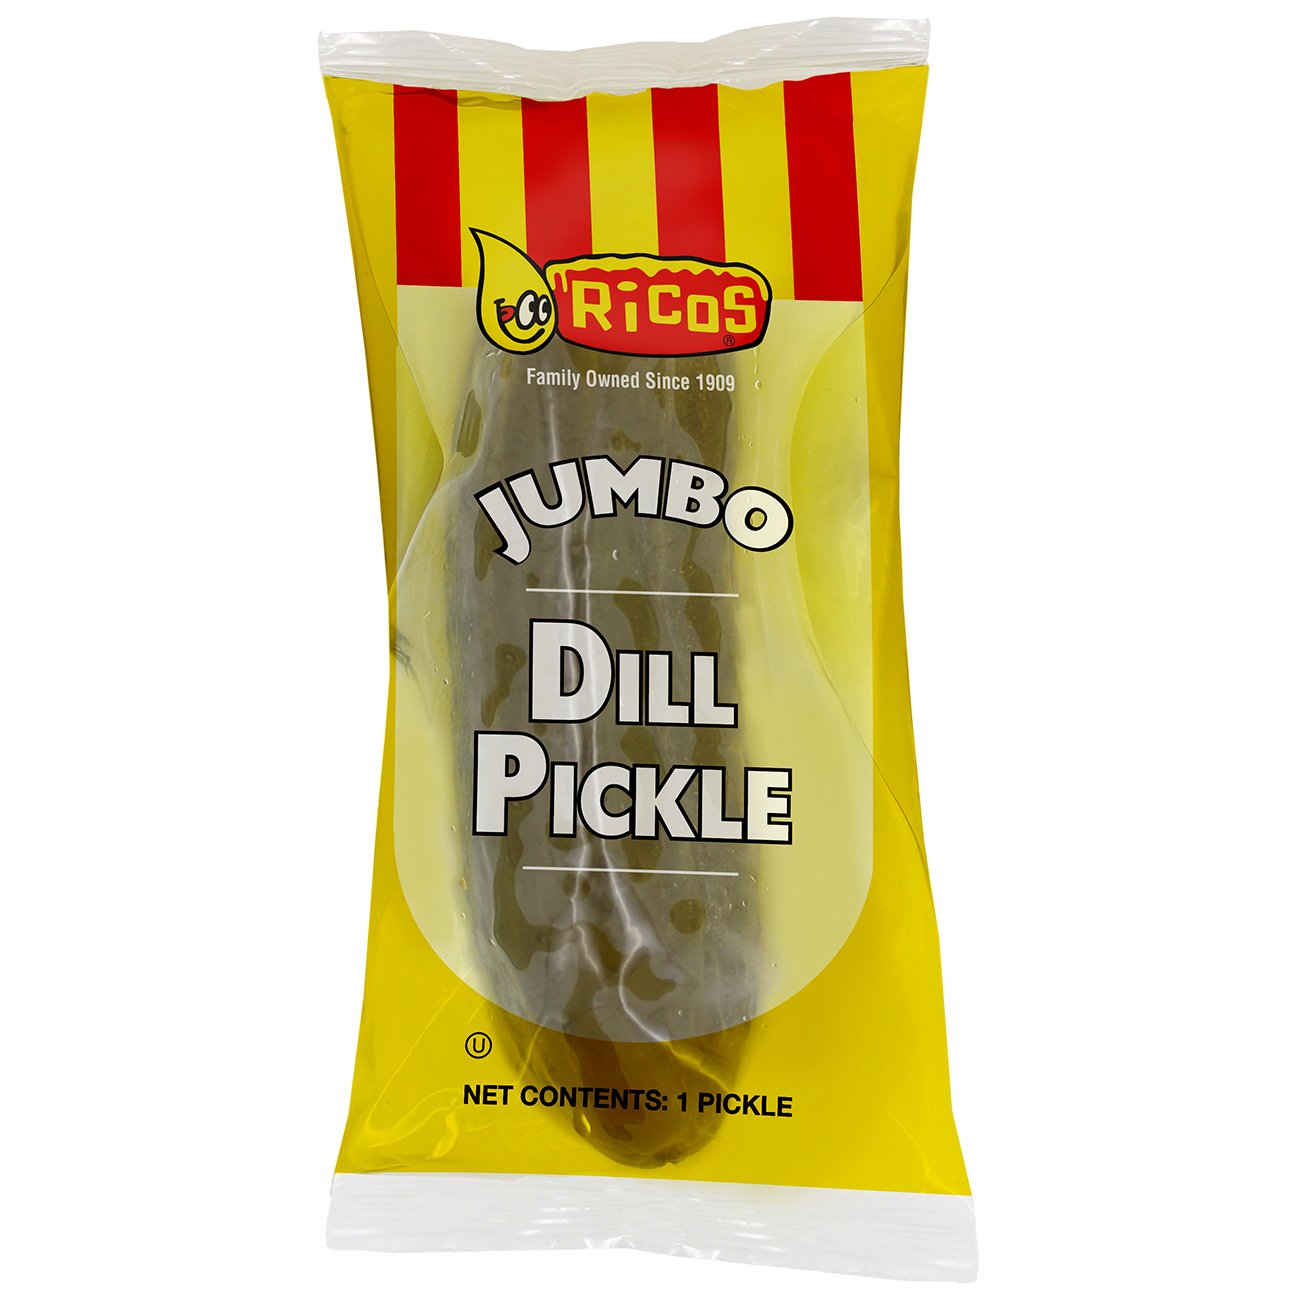 Viral Pickle Kit, Pickle in a Bag, Spicy Pickle, Spicy Snacks